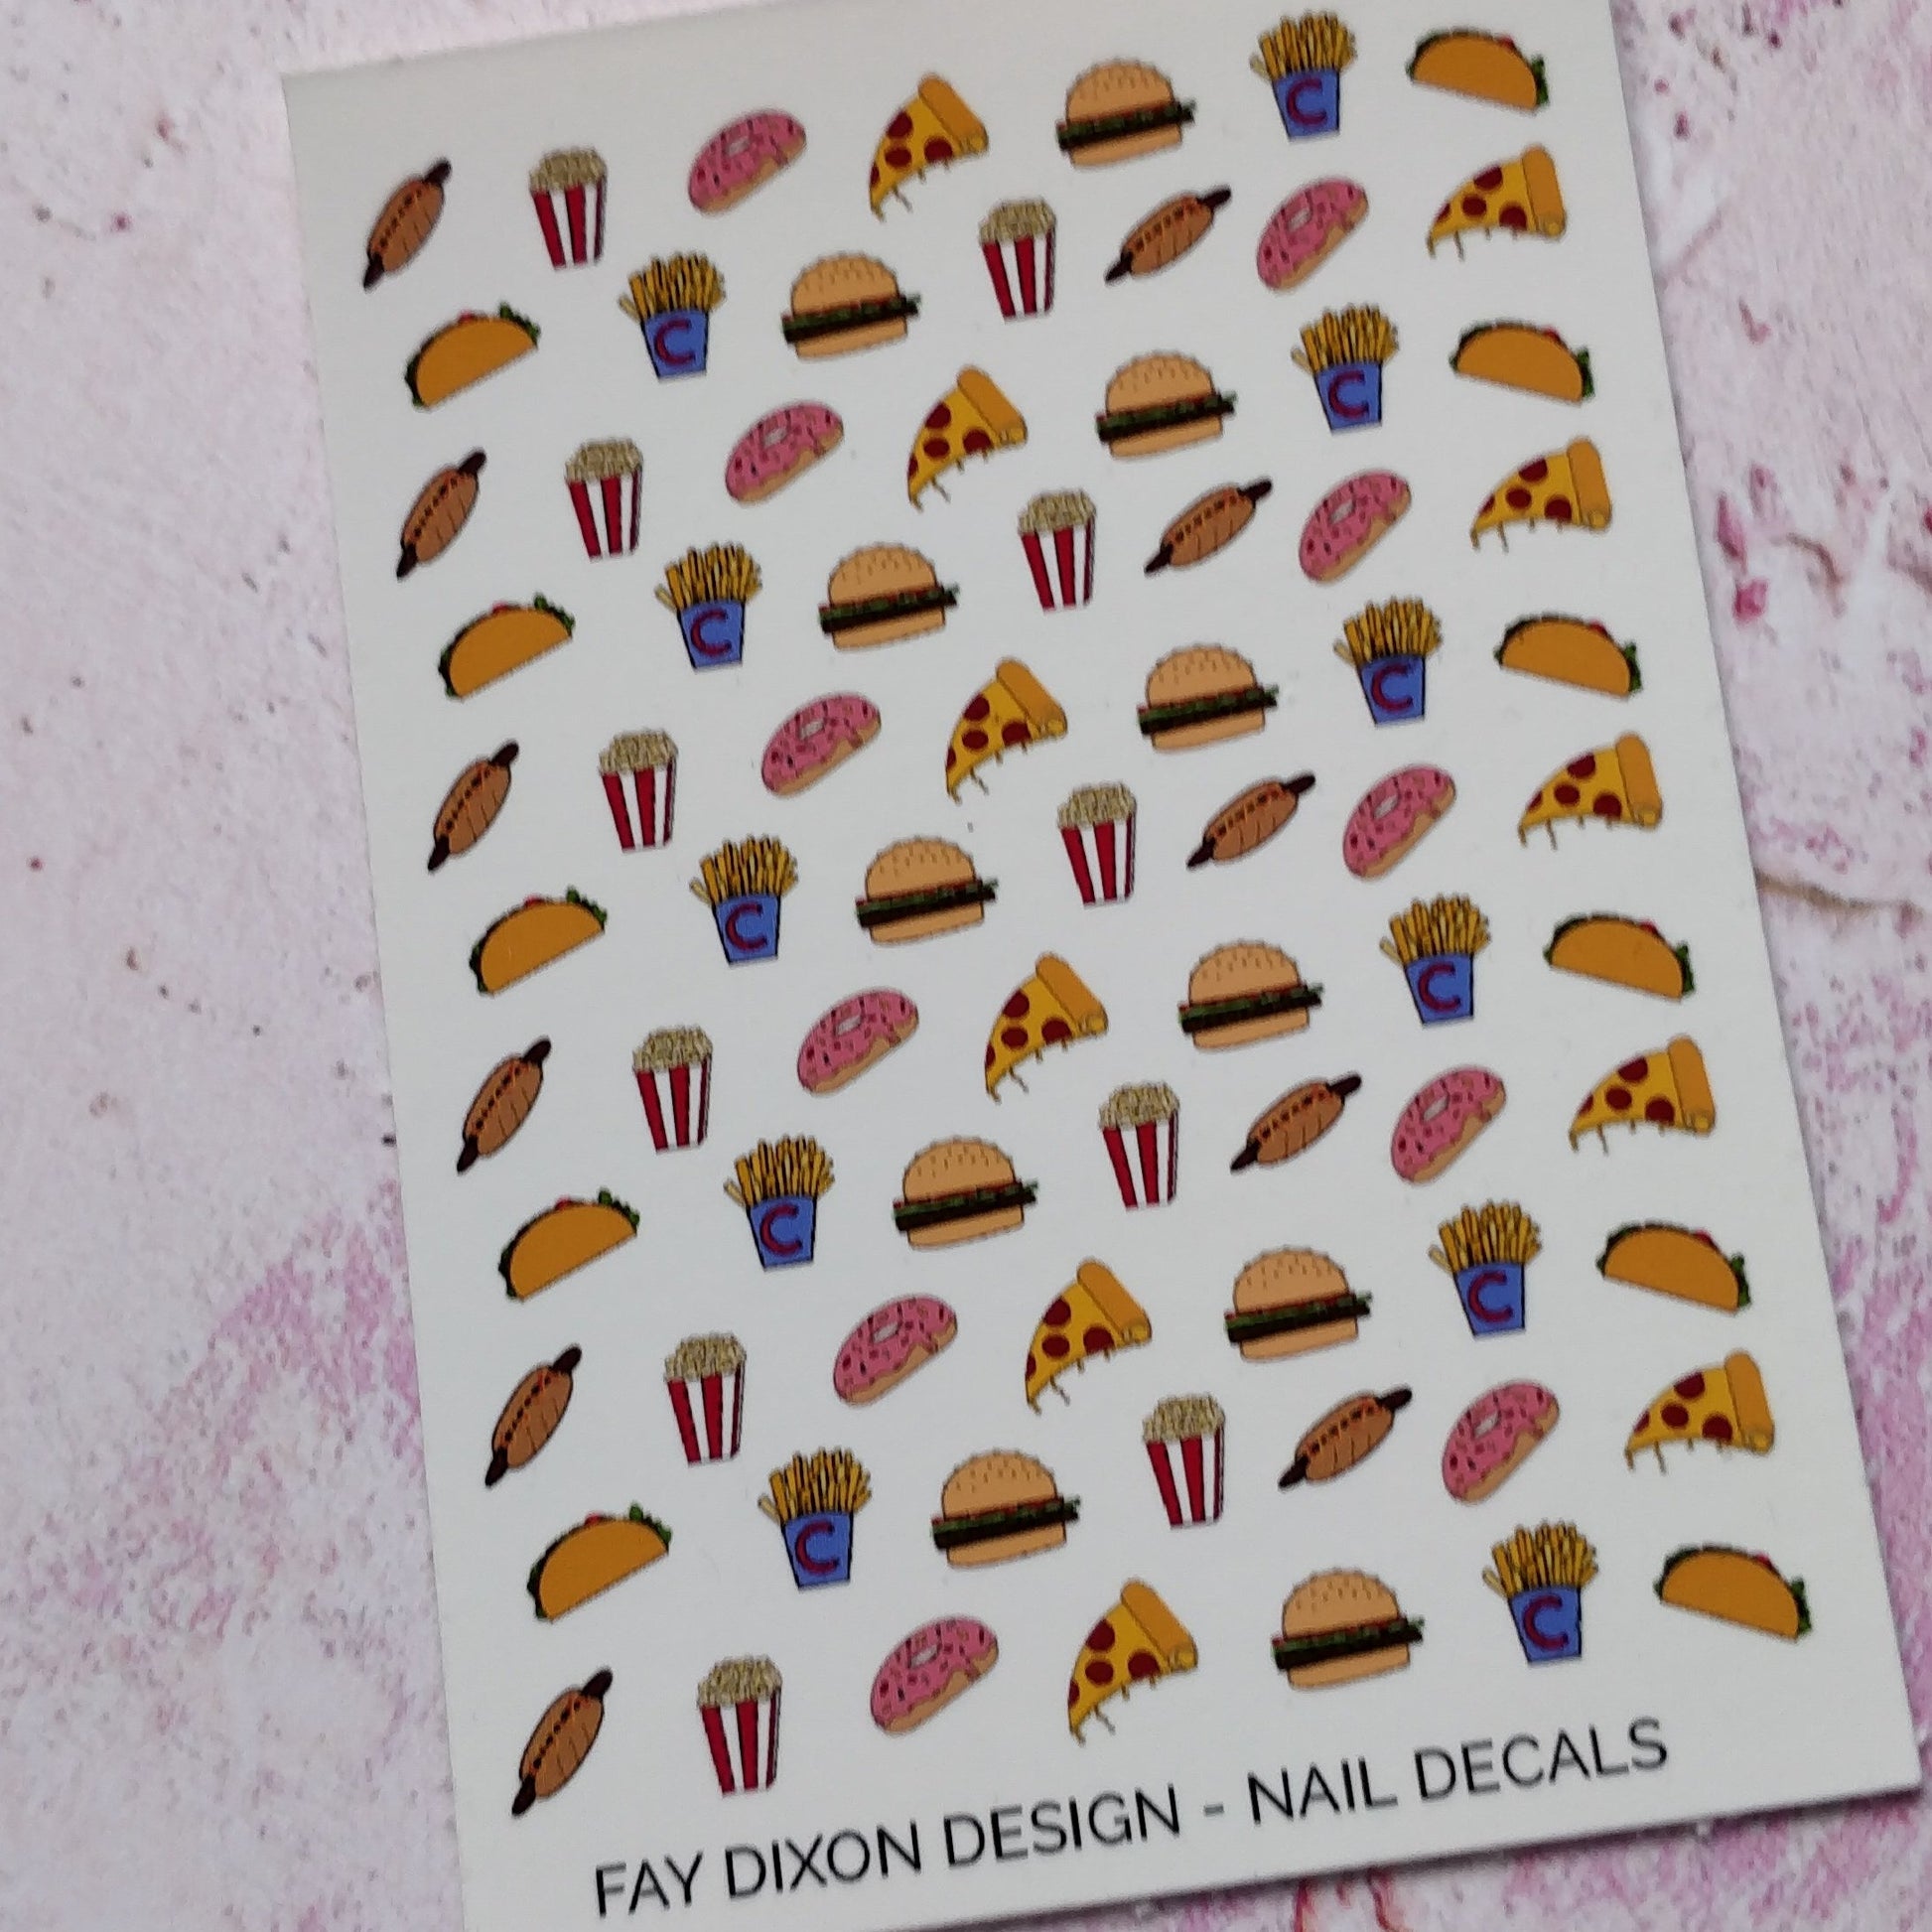 Fast Food Waterslide Nail Decals - Fay Dixon Design